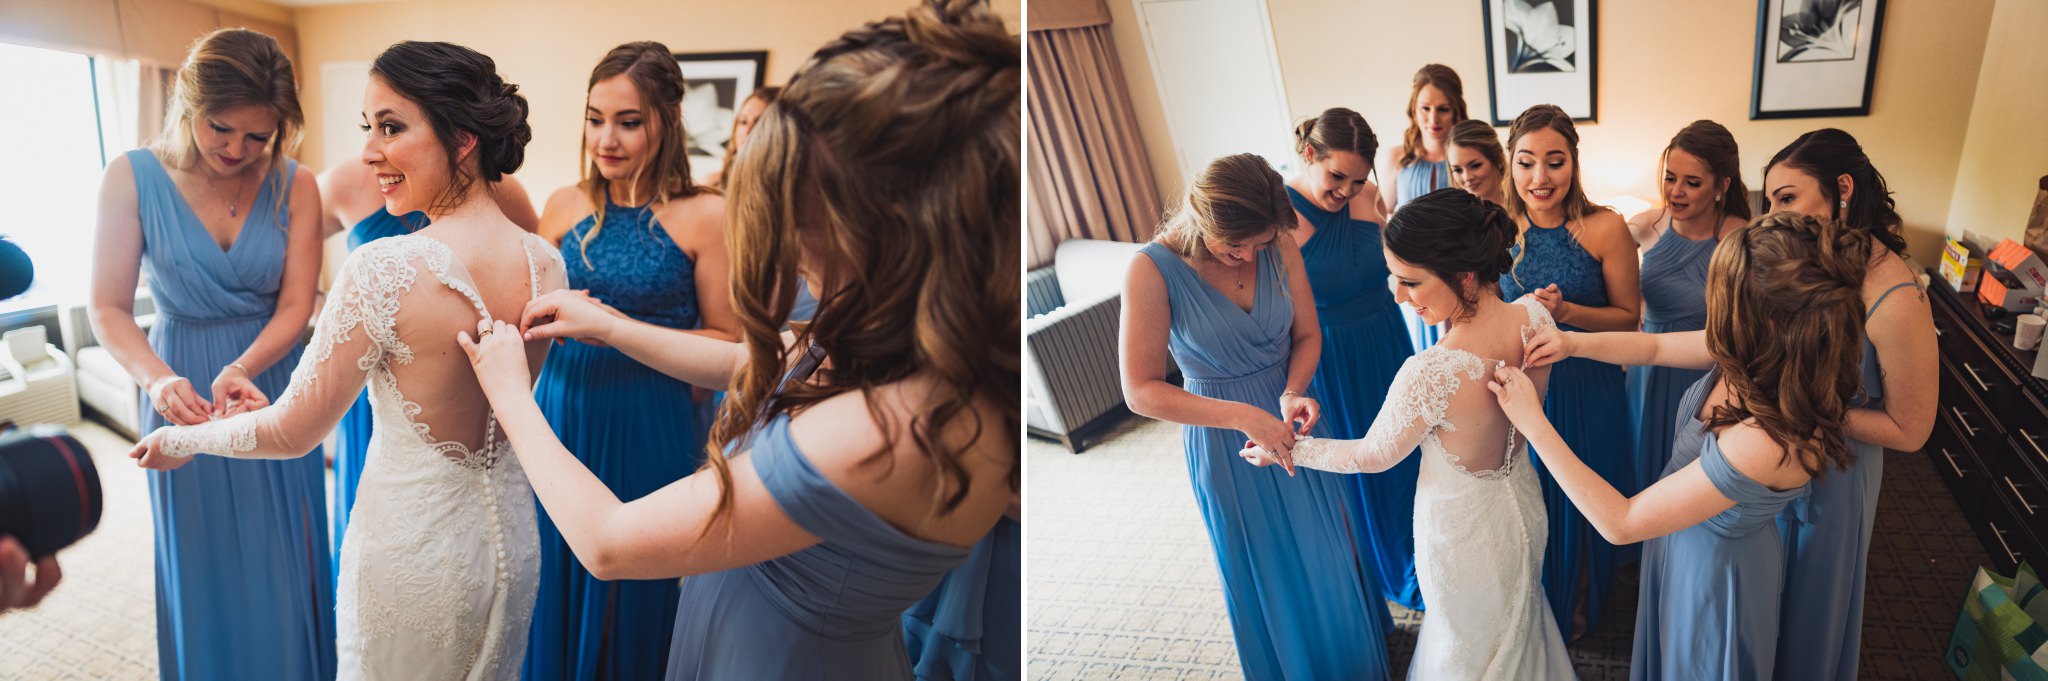  the bridesmaids admiring kelly's dress, and helping her to do the buttons on the back. I usually recommend crochet hooks for these kinds of knob/ button closures. 

Photos taken during Luke and Kelly's wedding in New Jersey. photographed with a phot